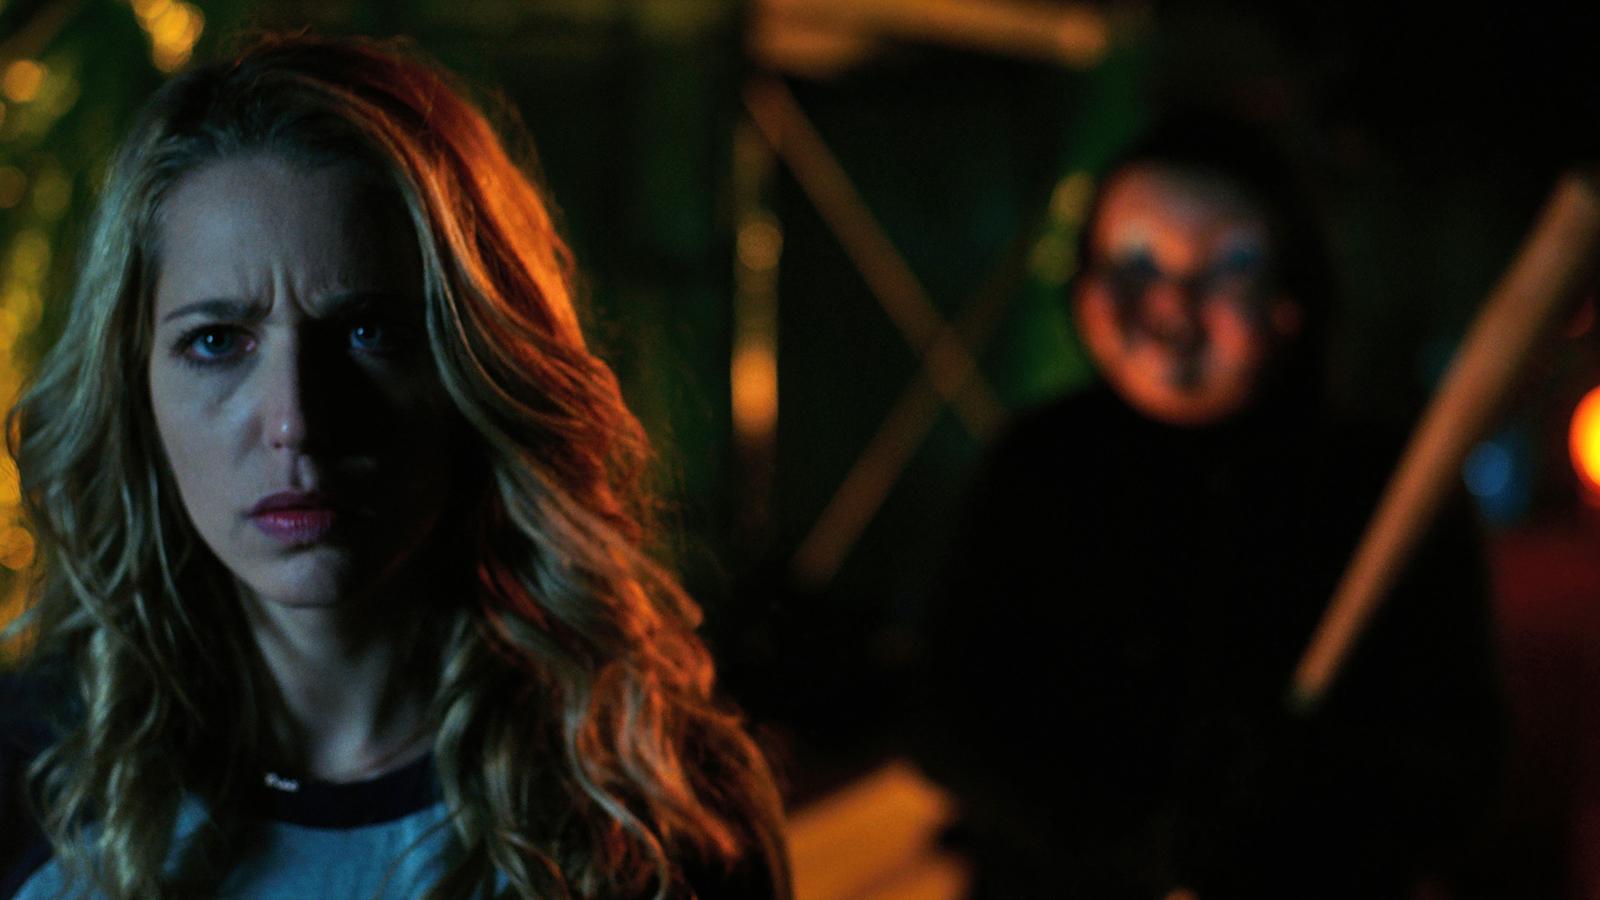 Horror movie 'Happy Death Day' makes the most of its goofy